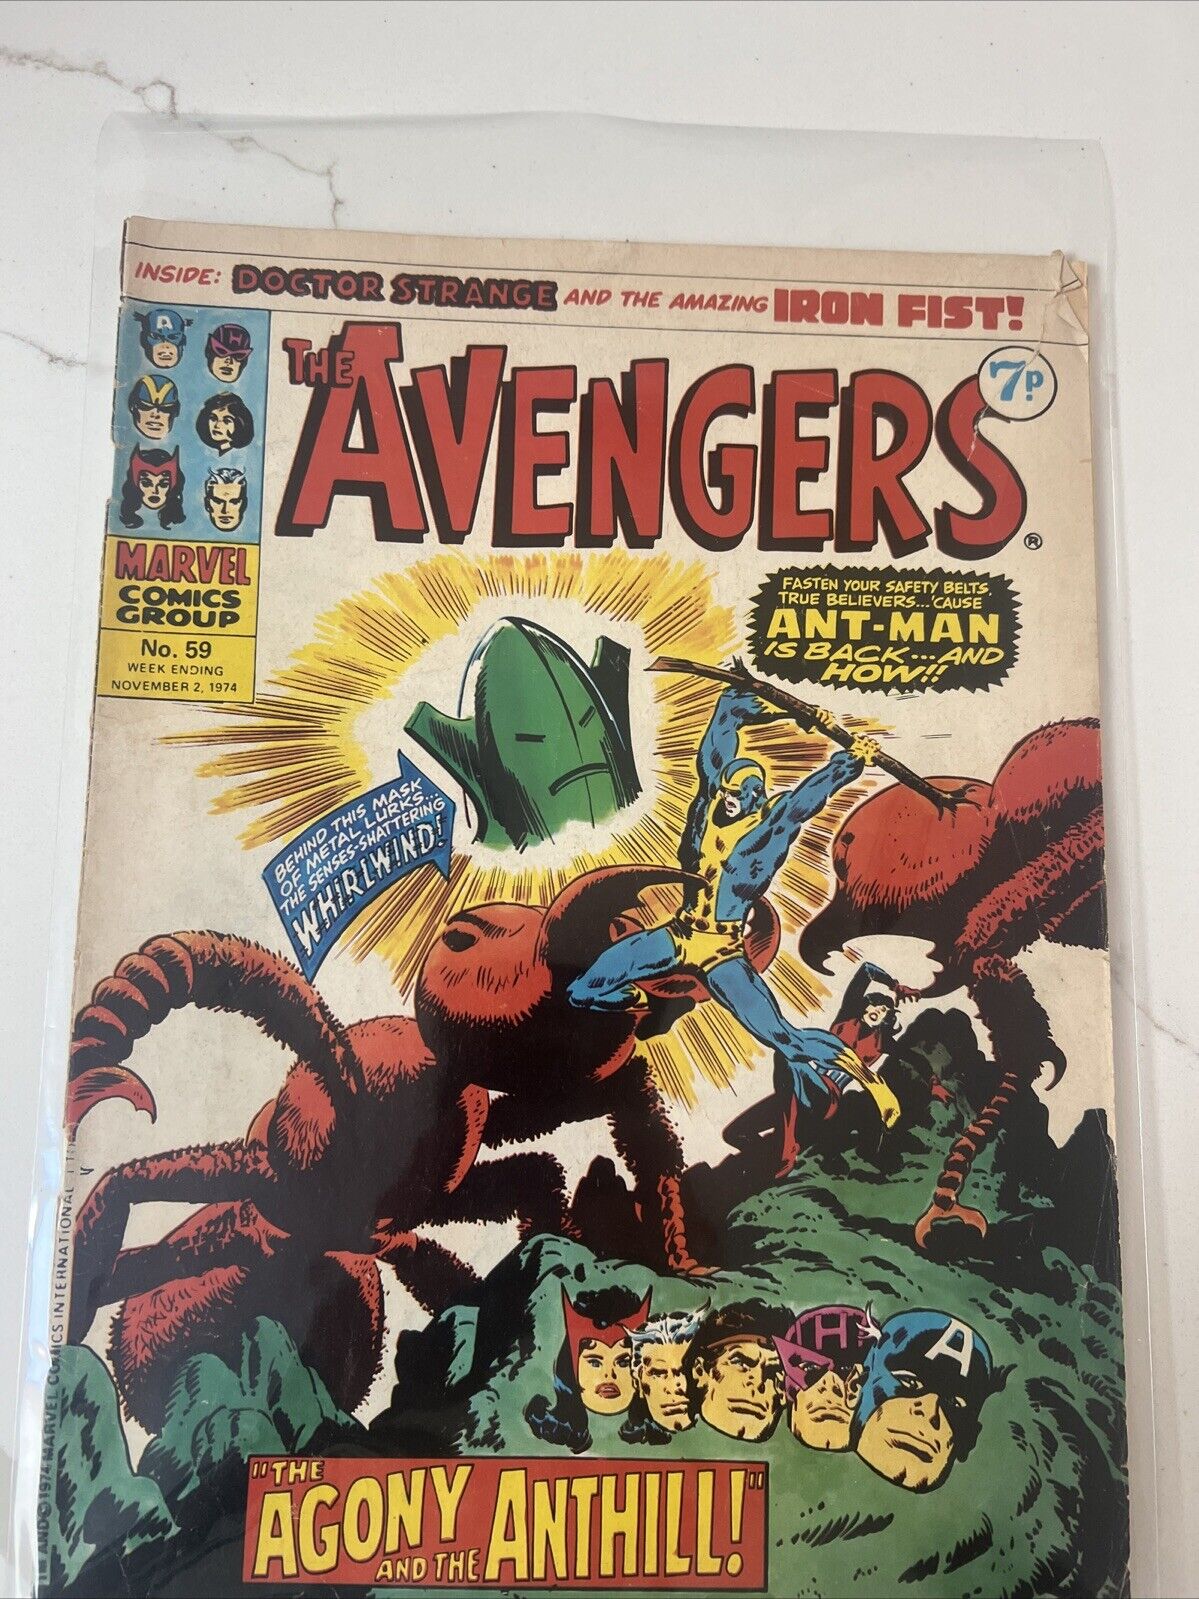 The Avengers #59-1974 Britain’s Finest Marvel Comics Weekly Group UK